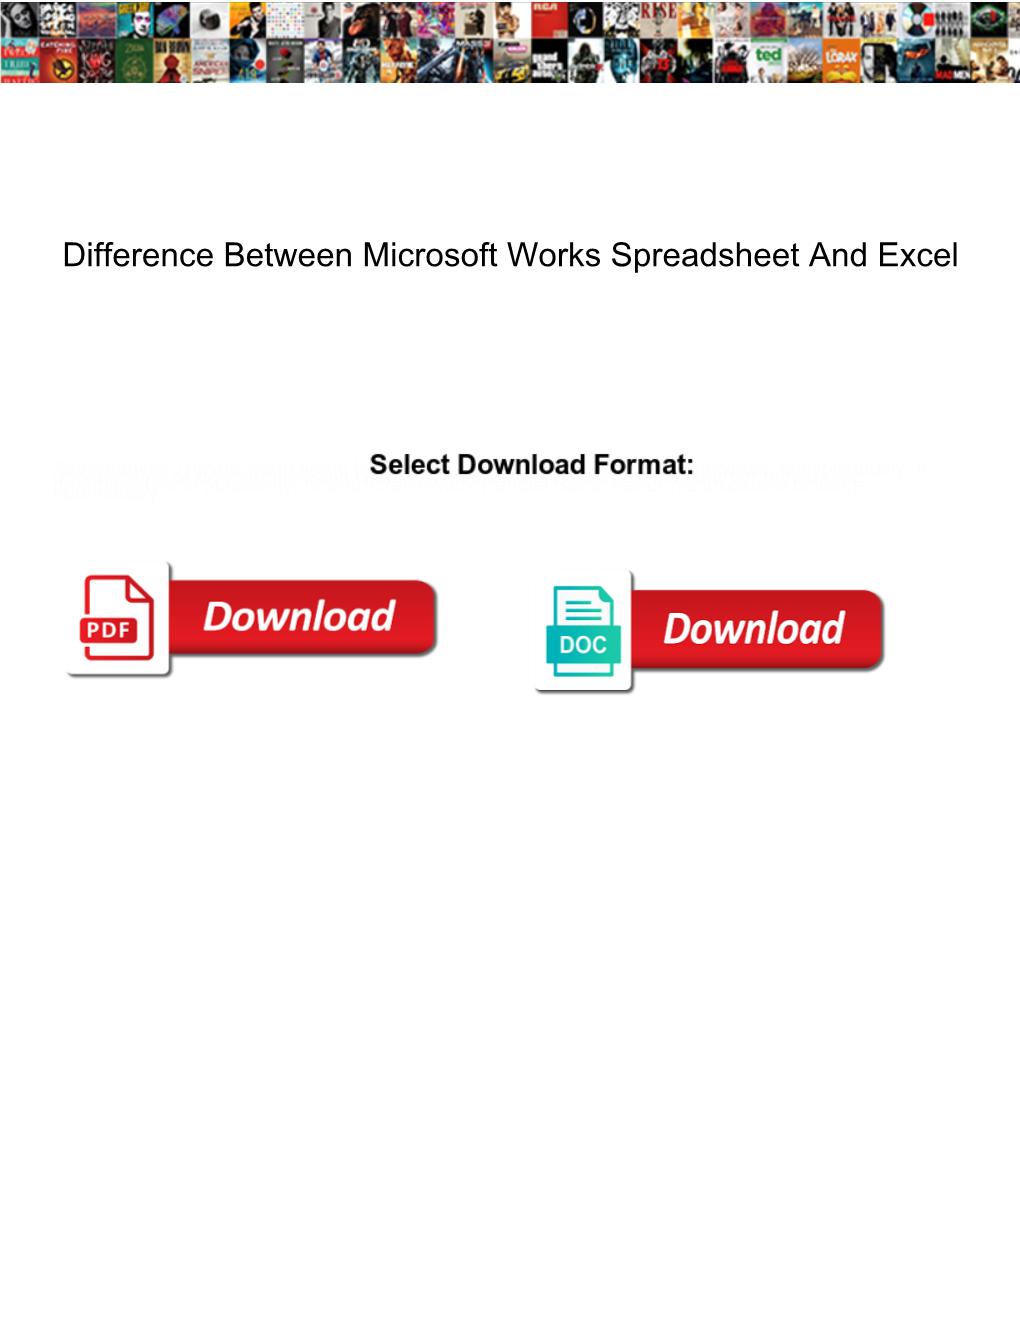 Difference Between Microsoft Works Spreadsheet and Excel